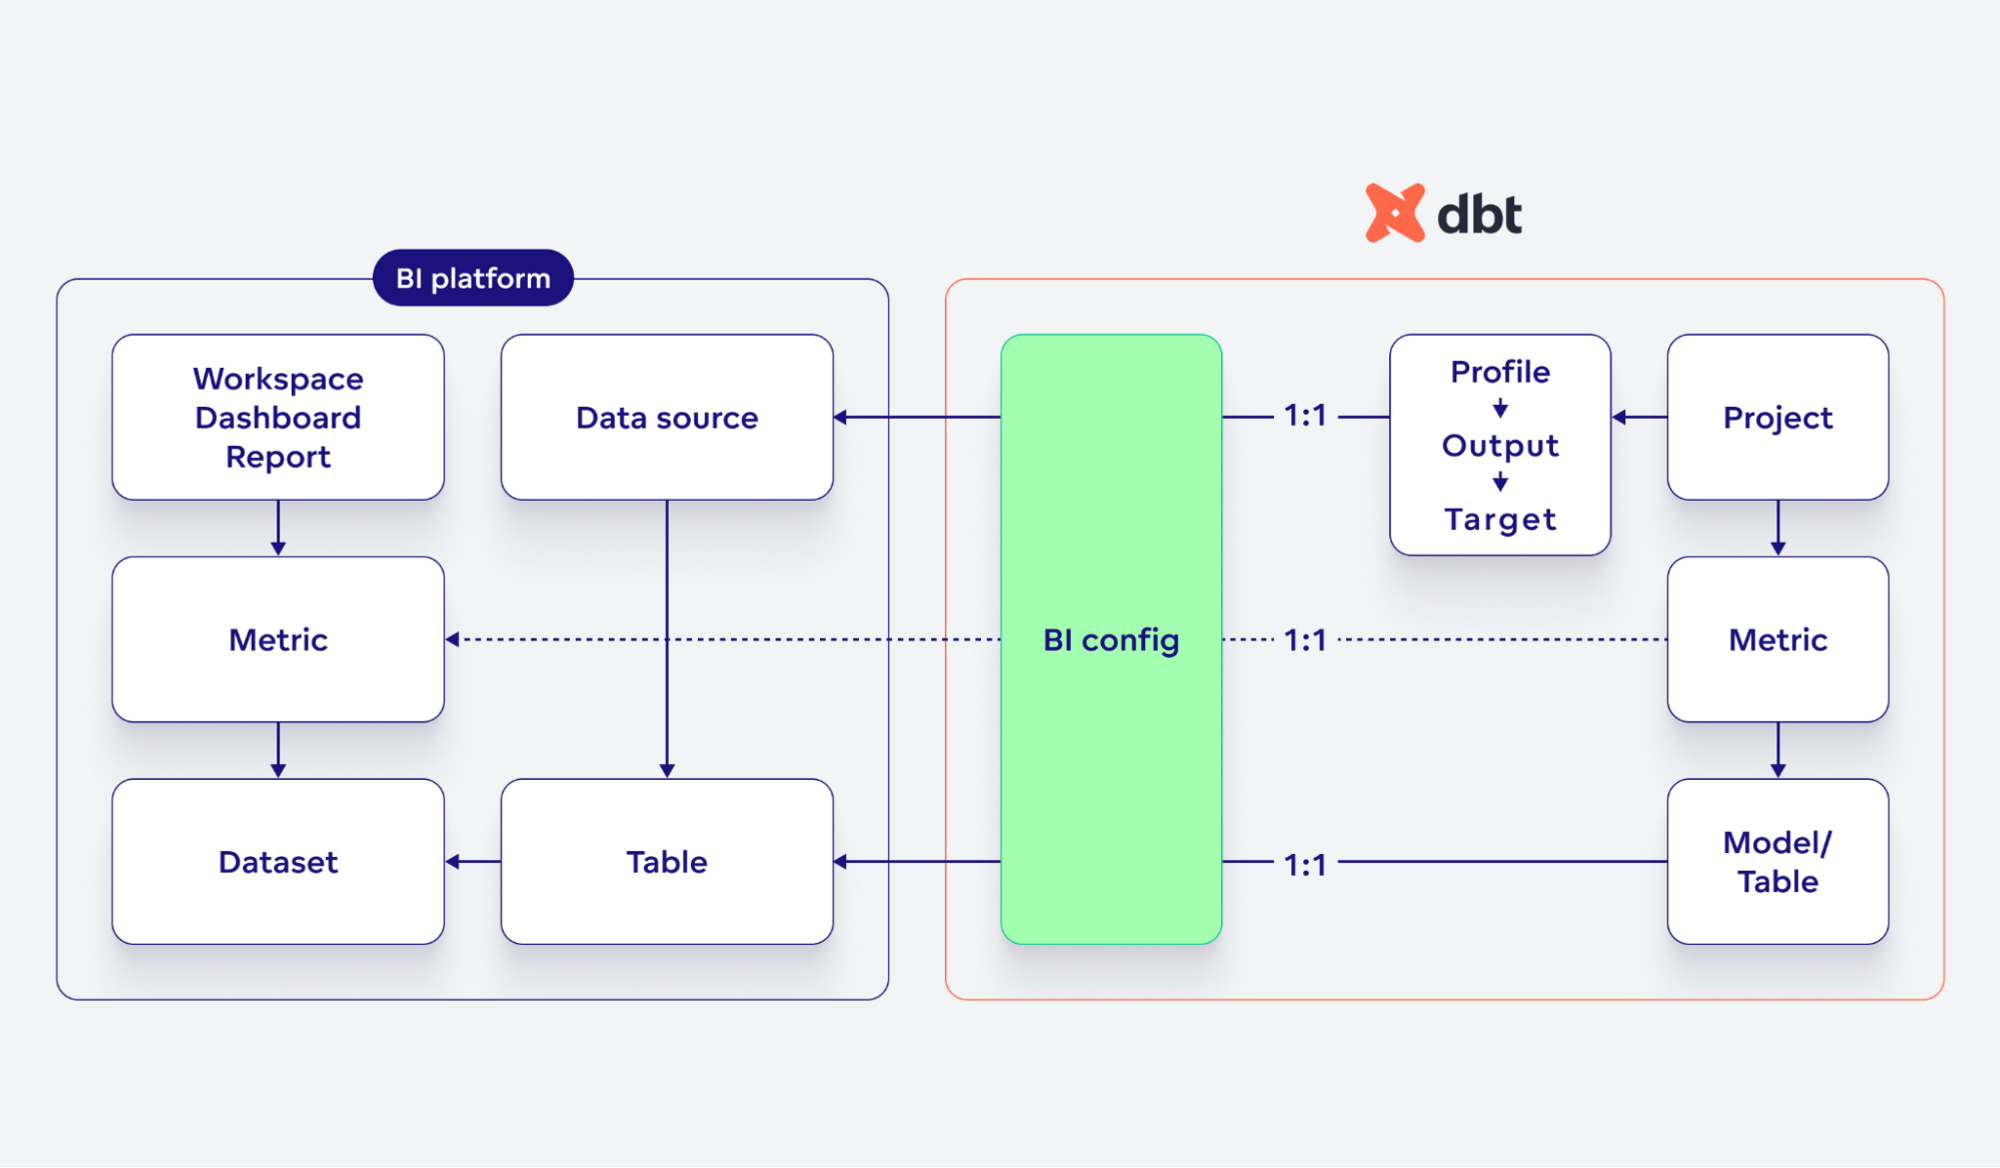 Relationships between BI and dbt objects. They are mapped to each other in a BI config file.